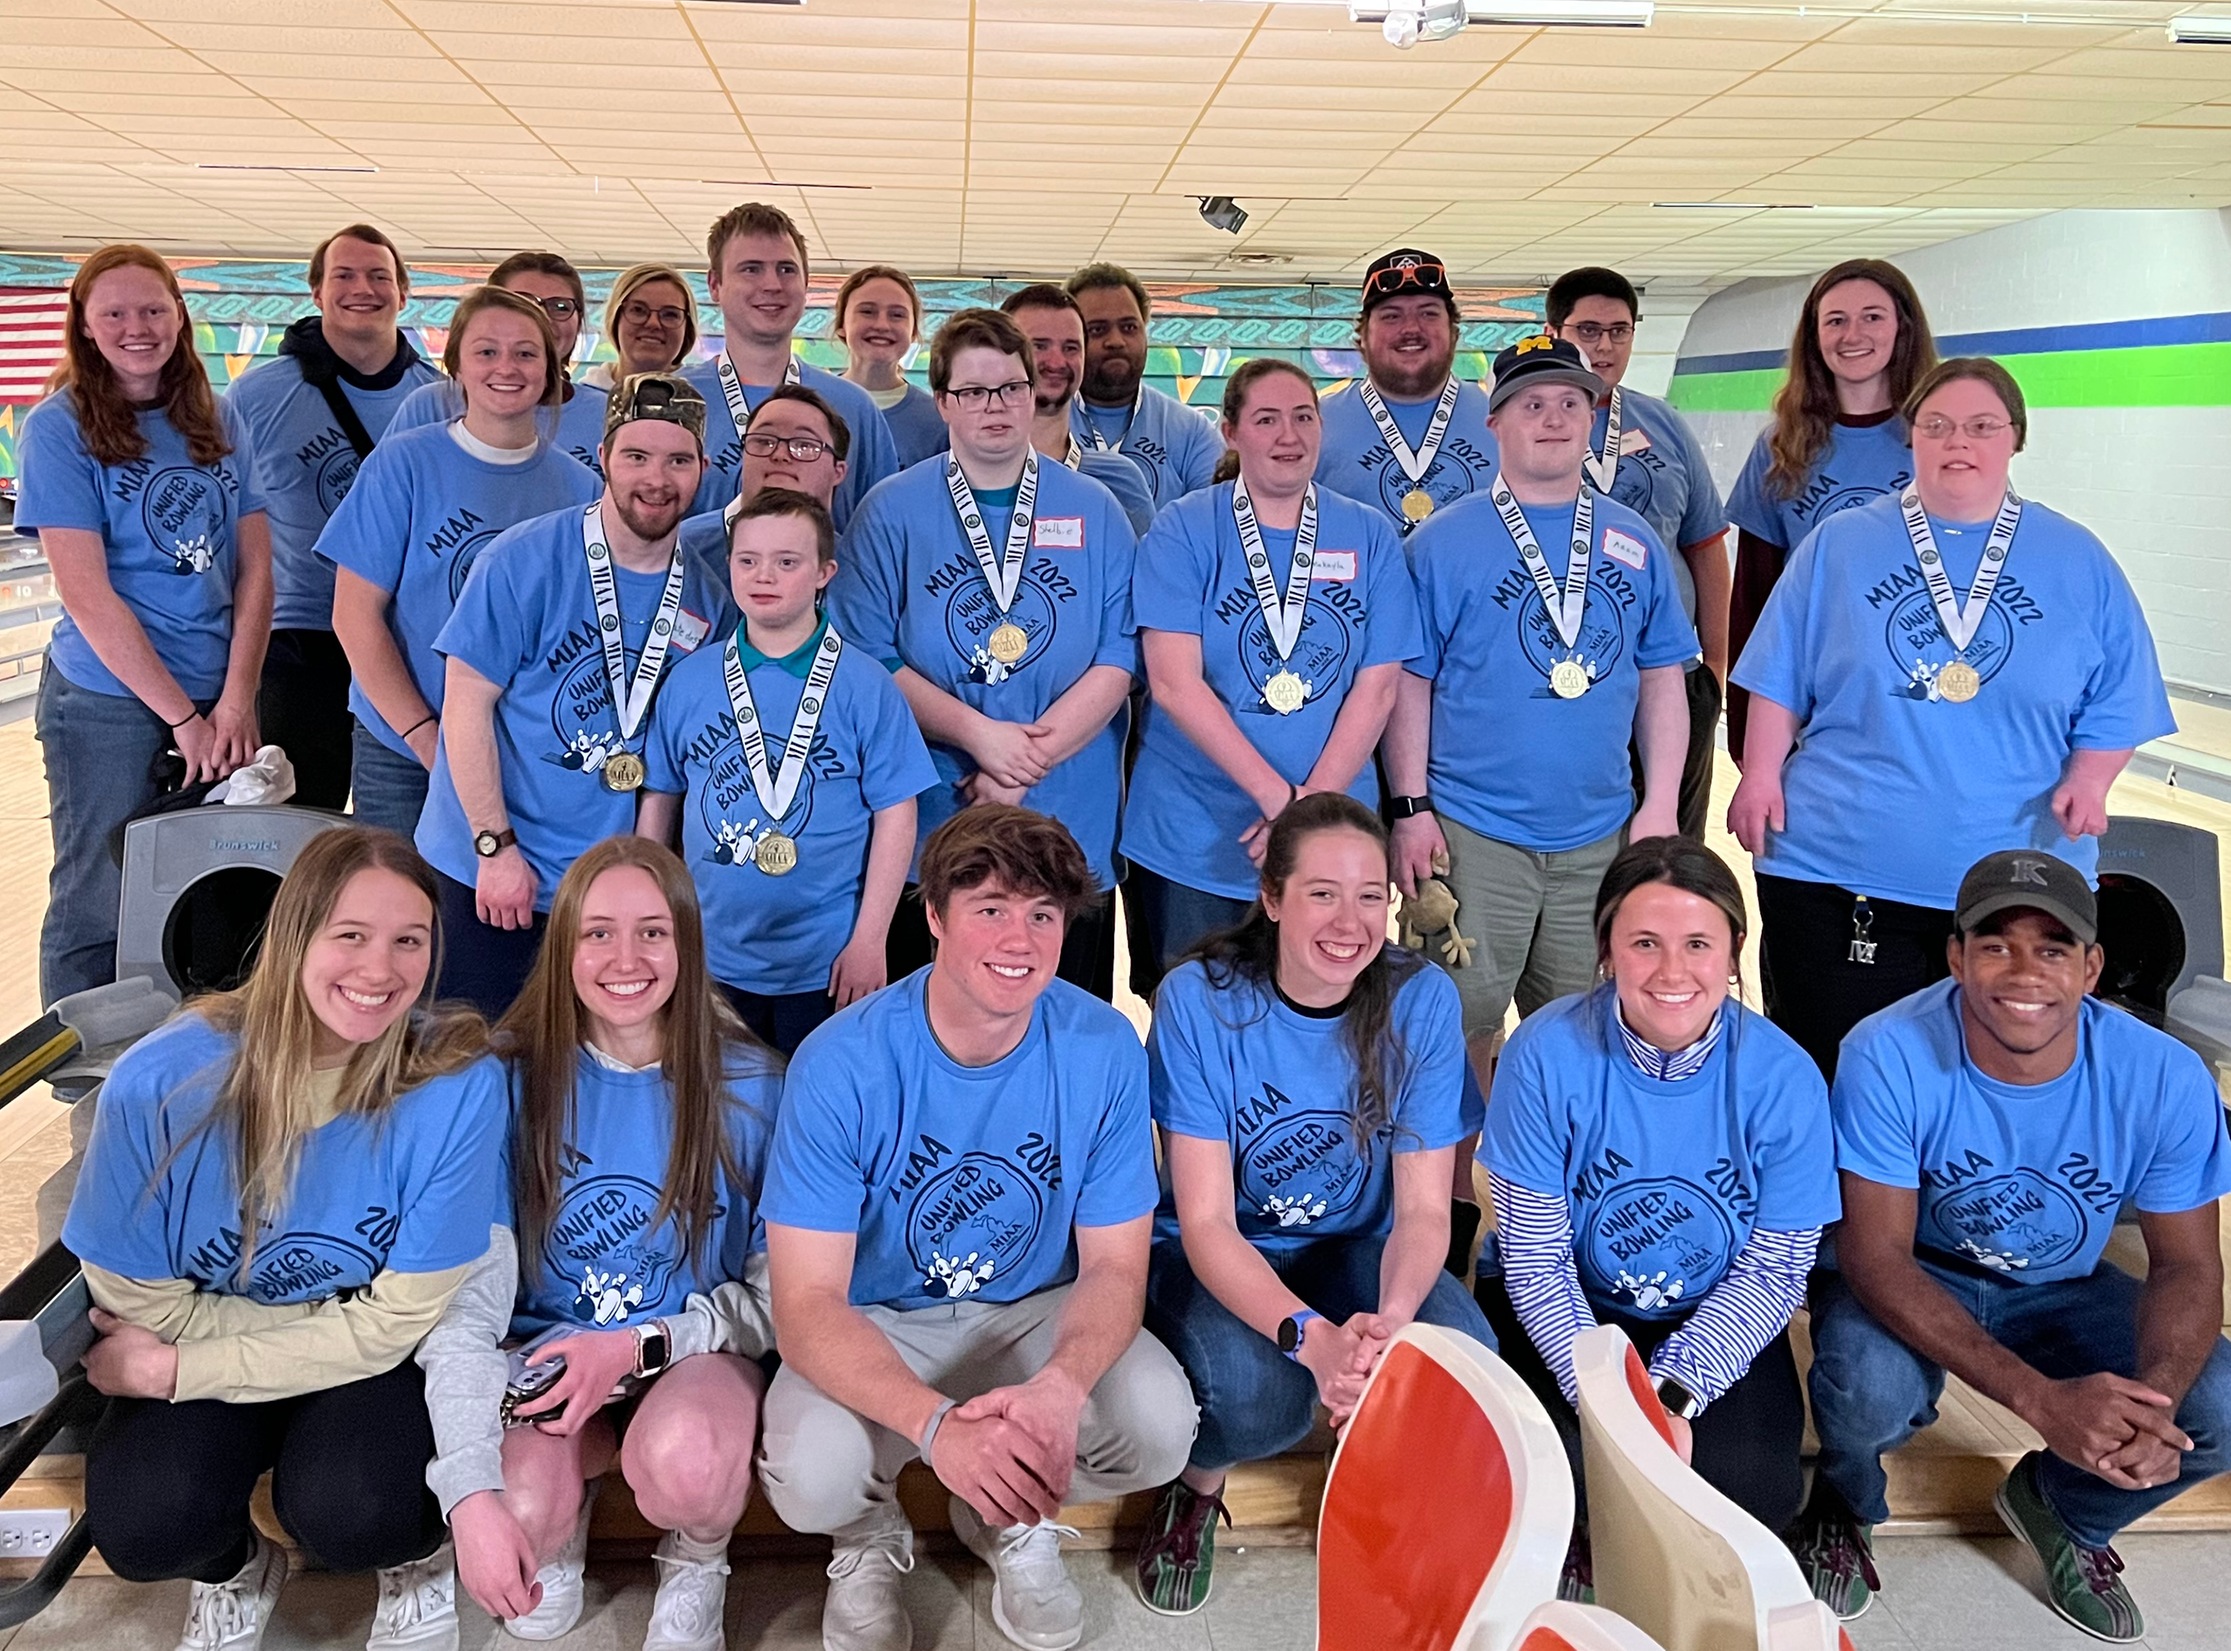 MIAA Concludes 2022 NCAA Division III Week with Unified Bowling Event